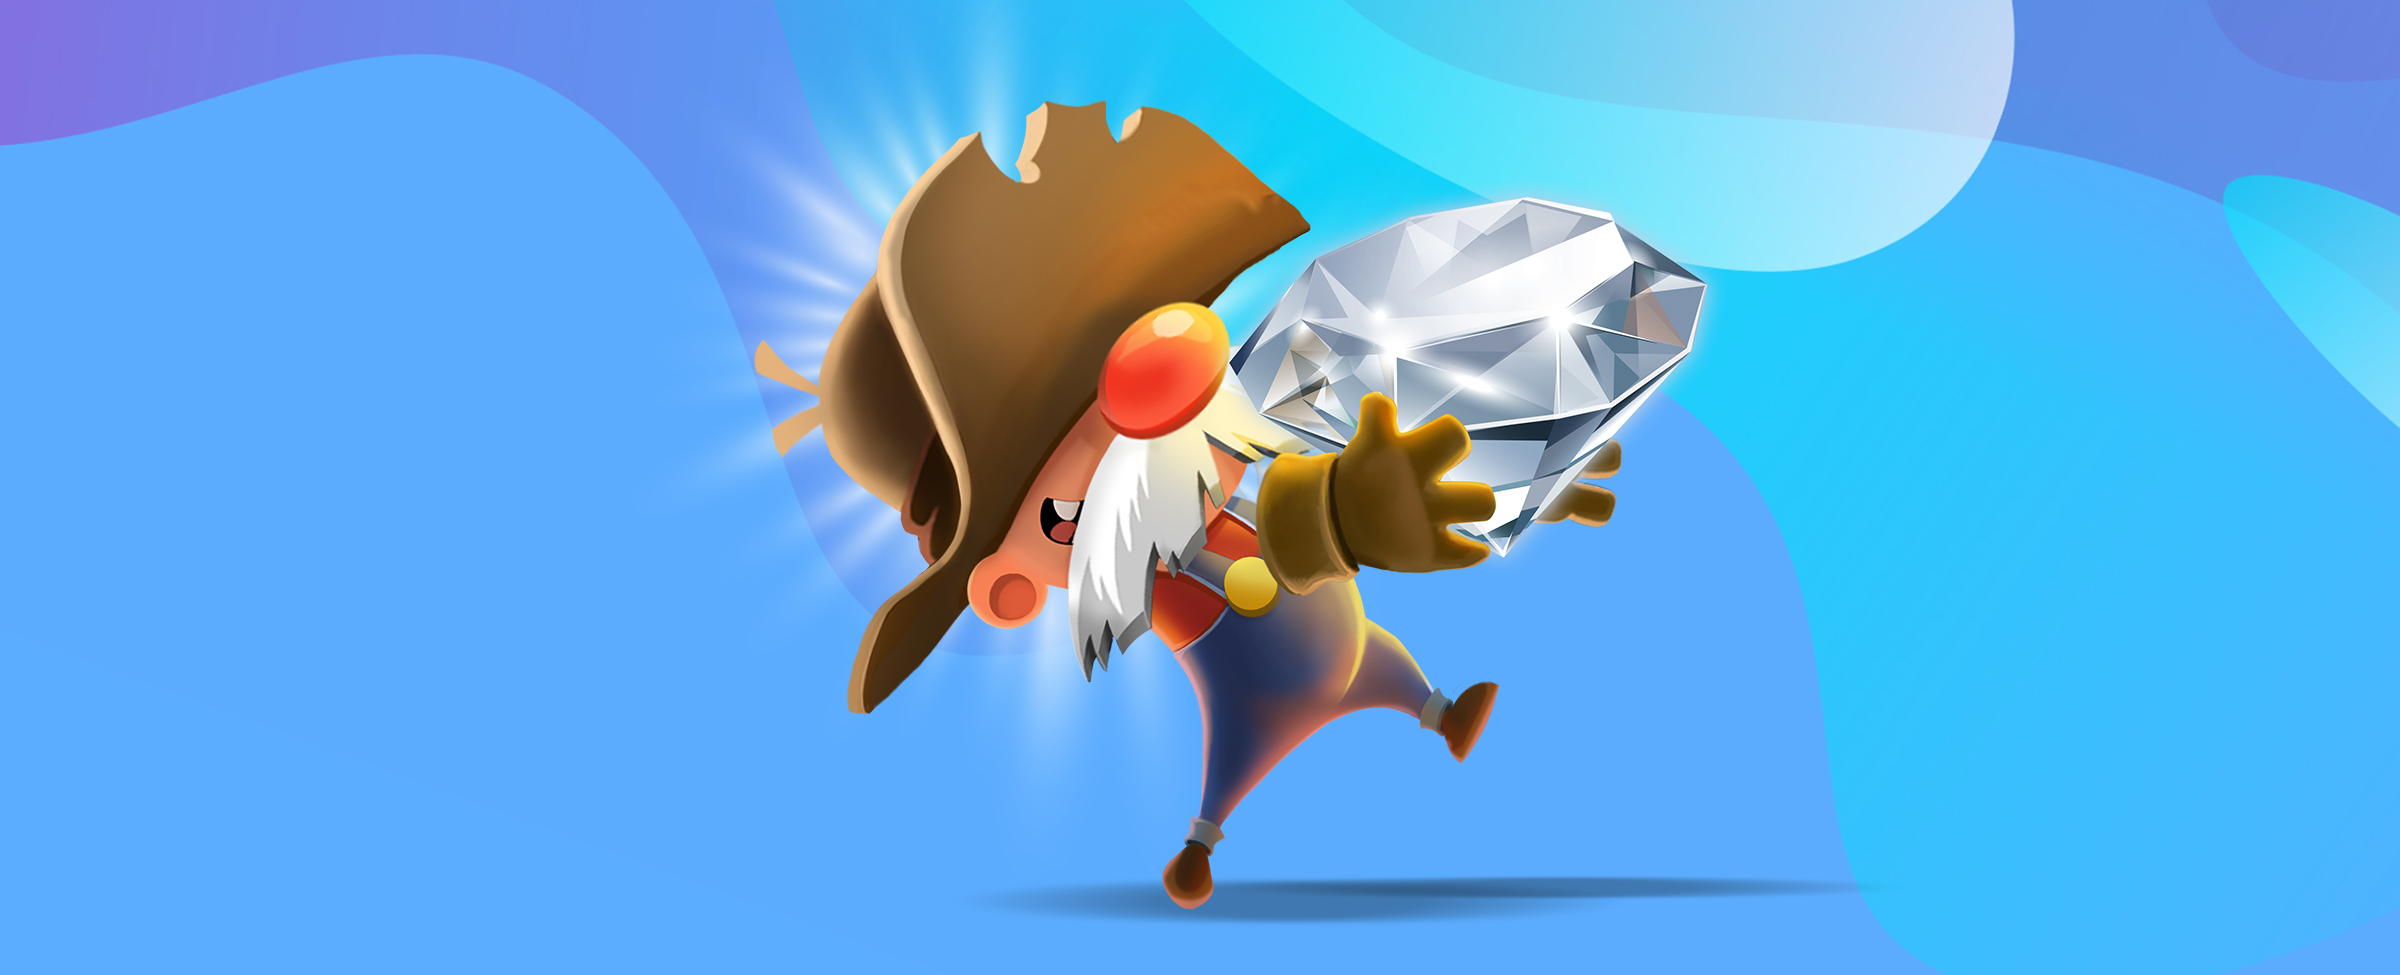 A cartoon gold miner from the SlotsLV Gold Rush Gus slots game holds a massive diamond in his hands, set against a blue background.